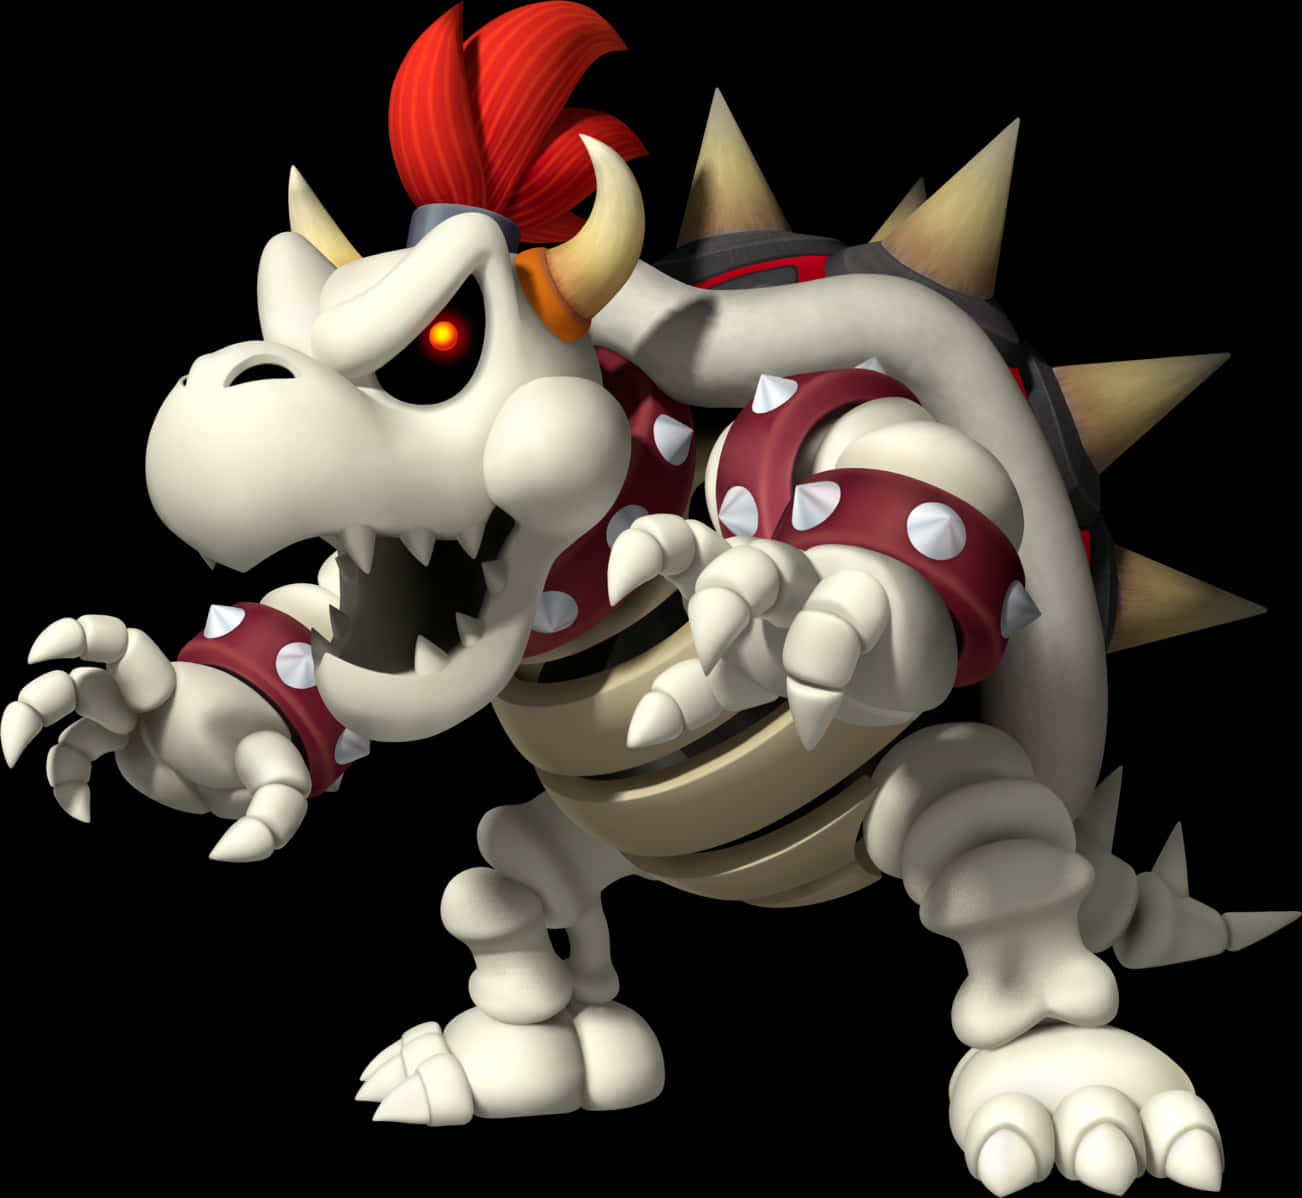 A Cartoon Character Of A White Dinosaur With Red Spikes